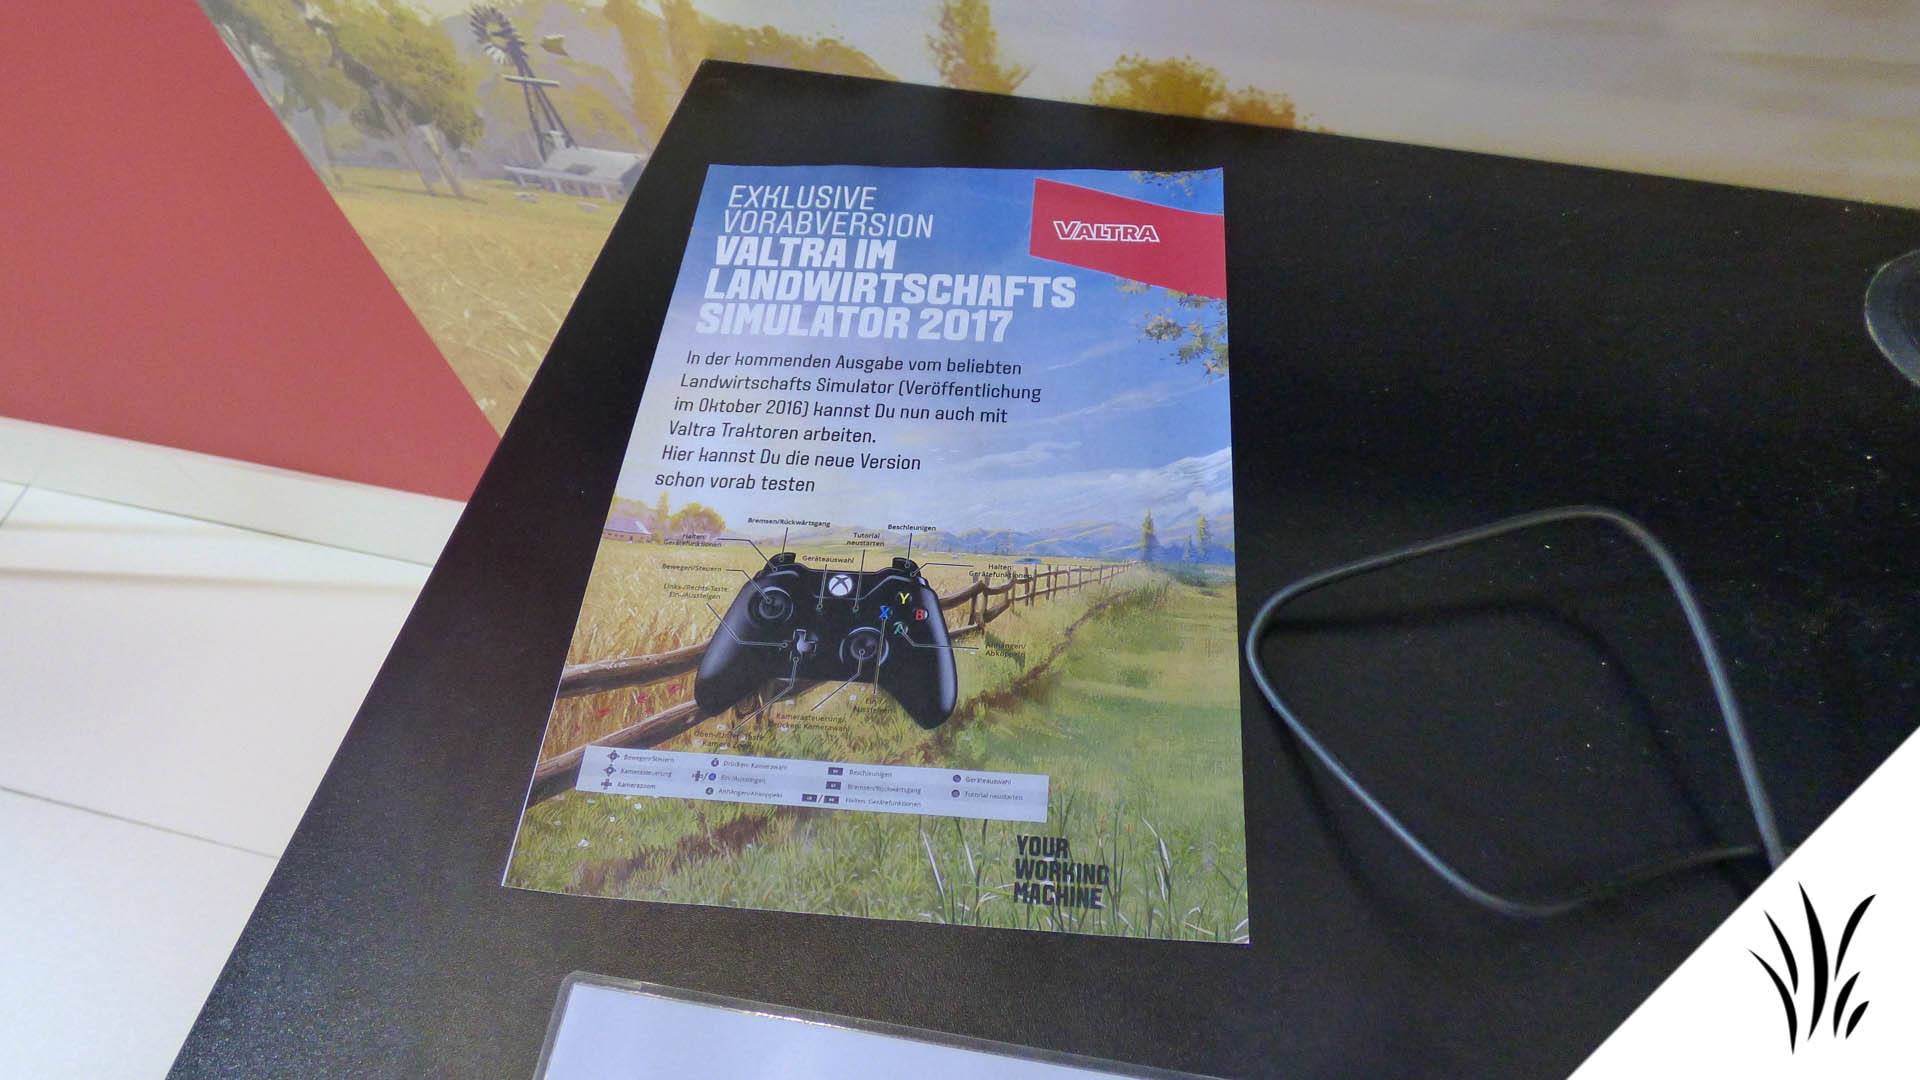 Some-new-photos-from-Farming-Simulator-2017-2